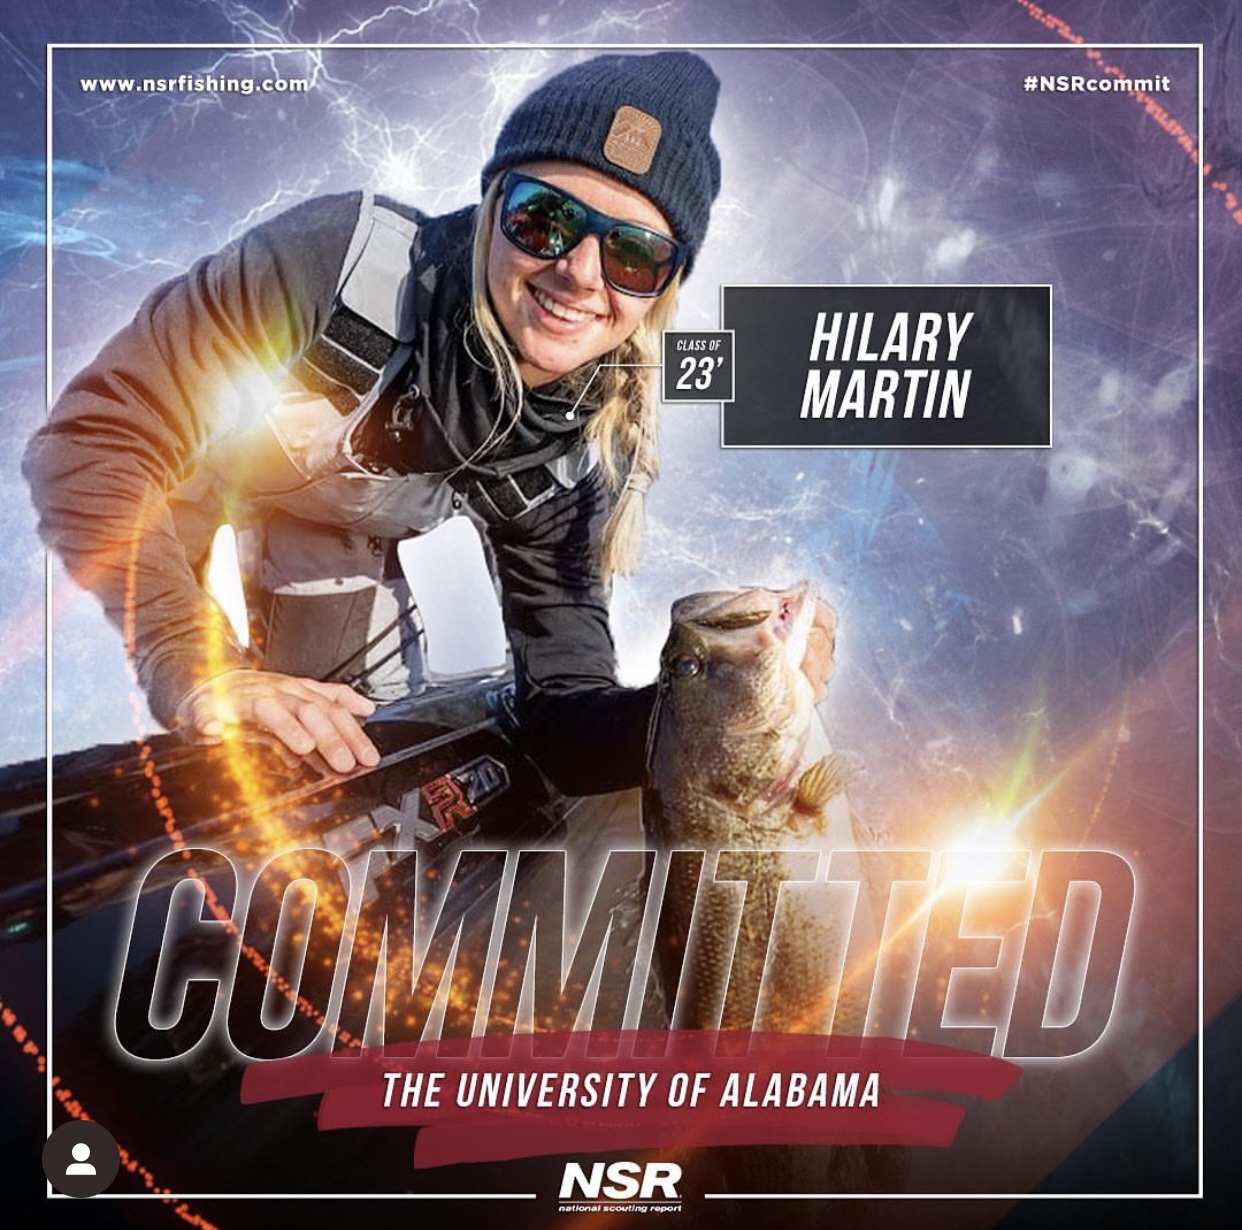 Hillary Martin Committed